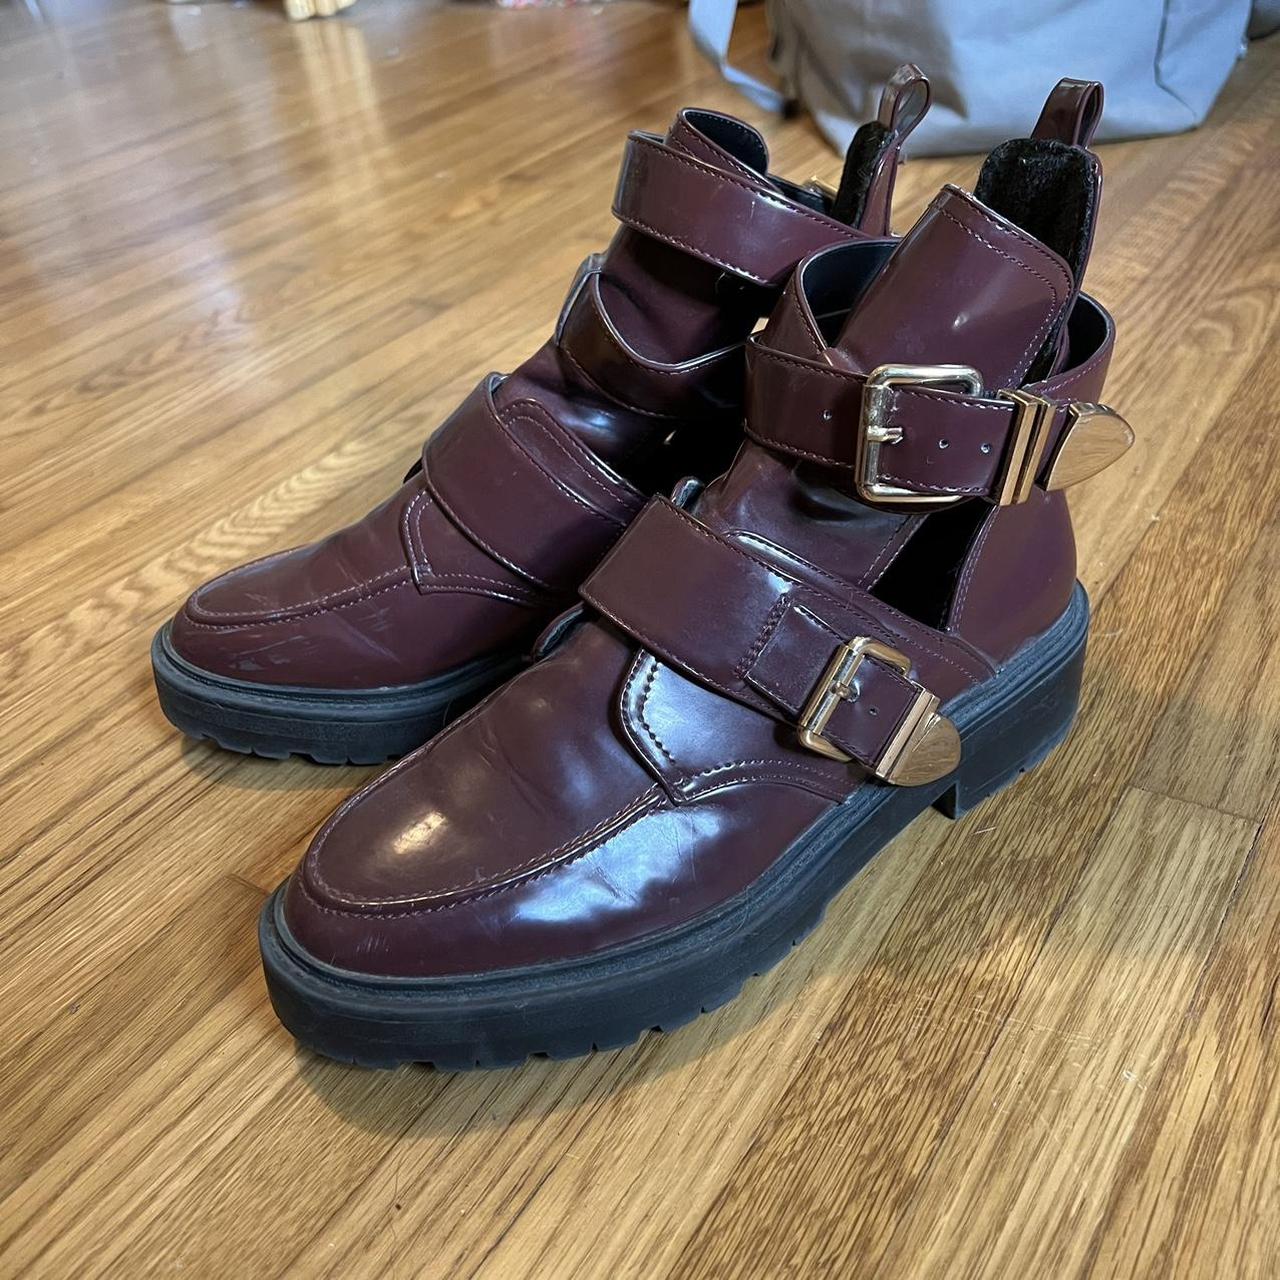 River Island Women's Burgundy and Gold Boots